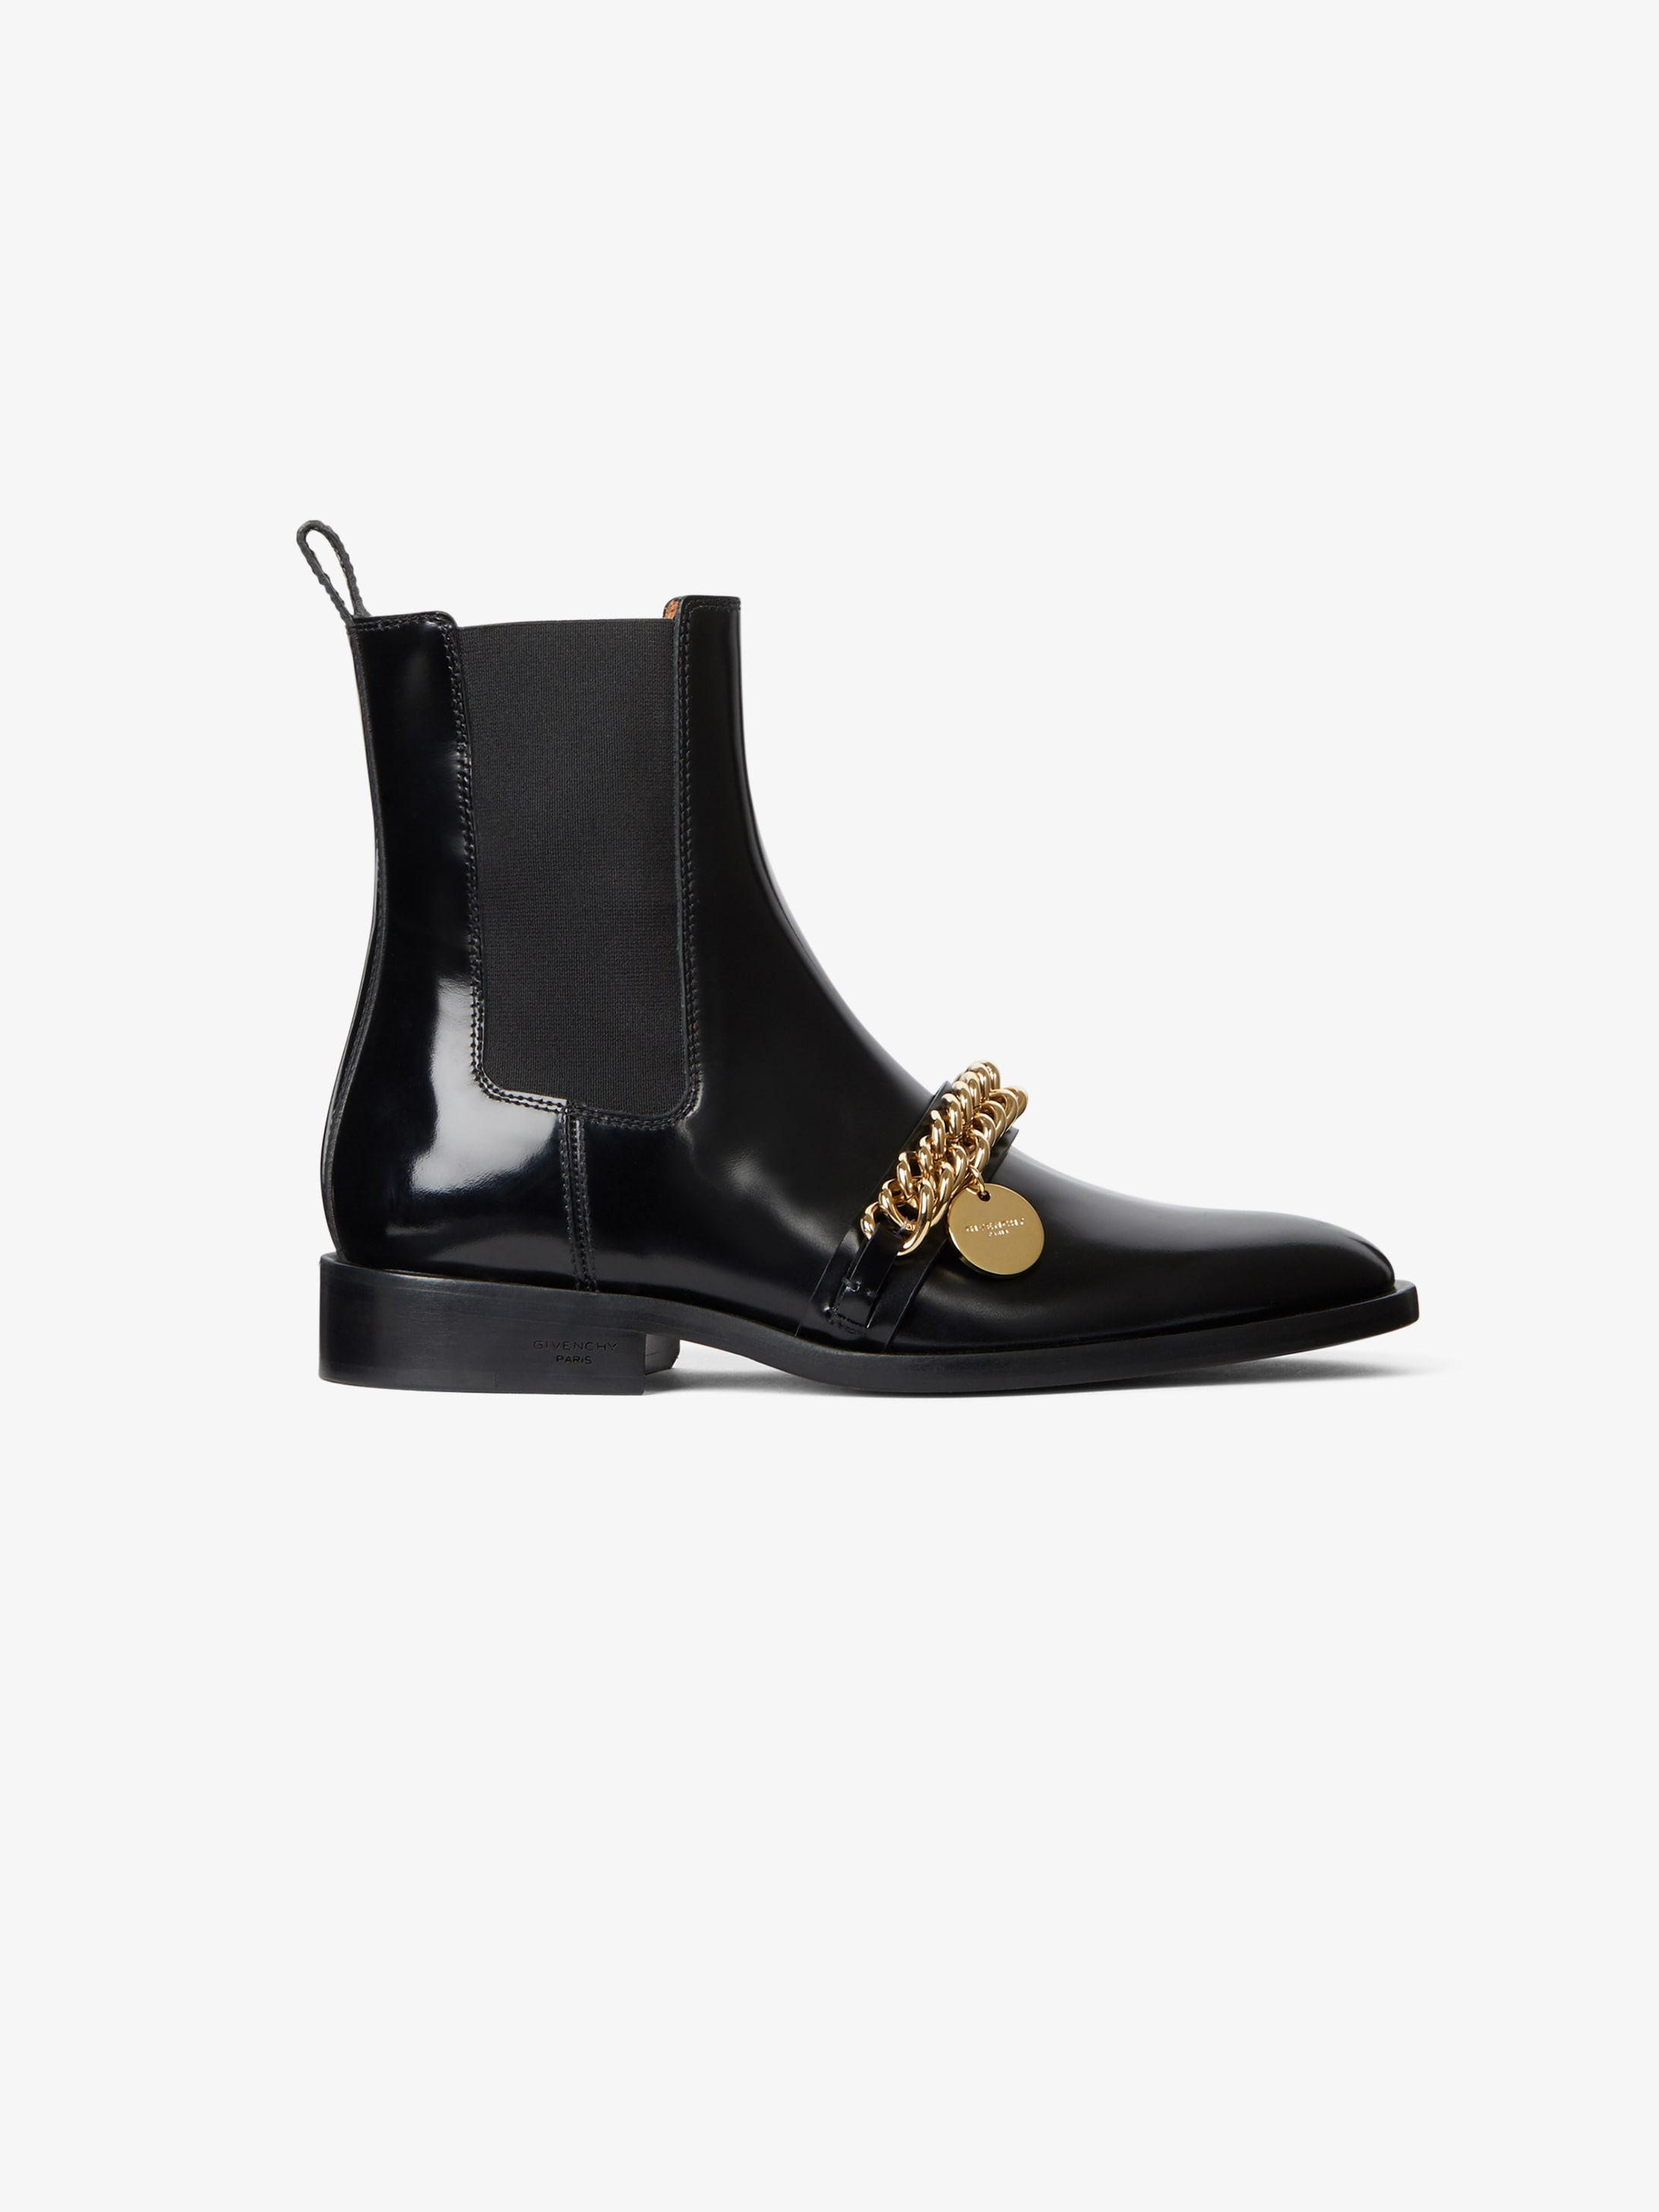 givenchy boots sizing